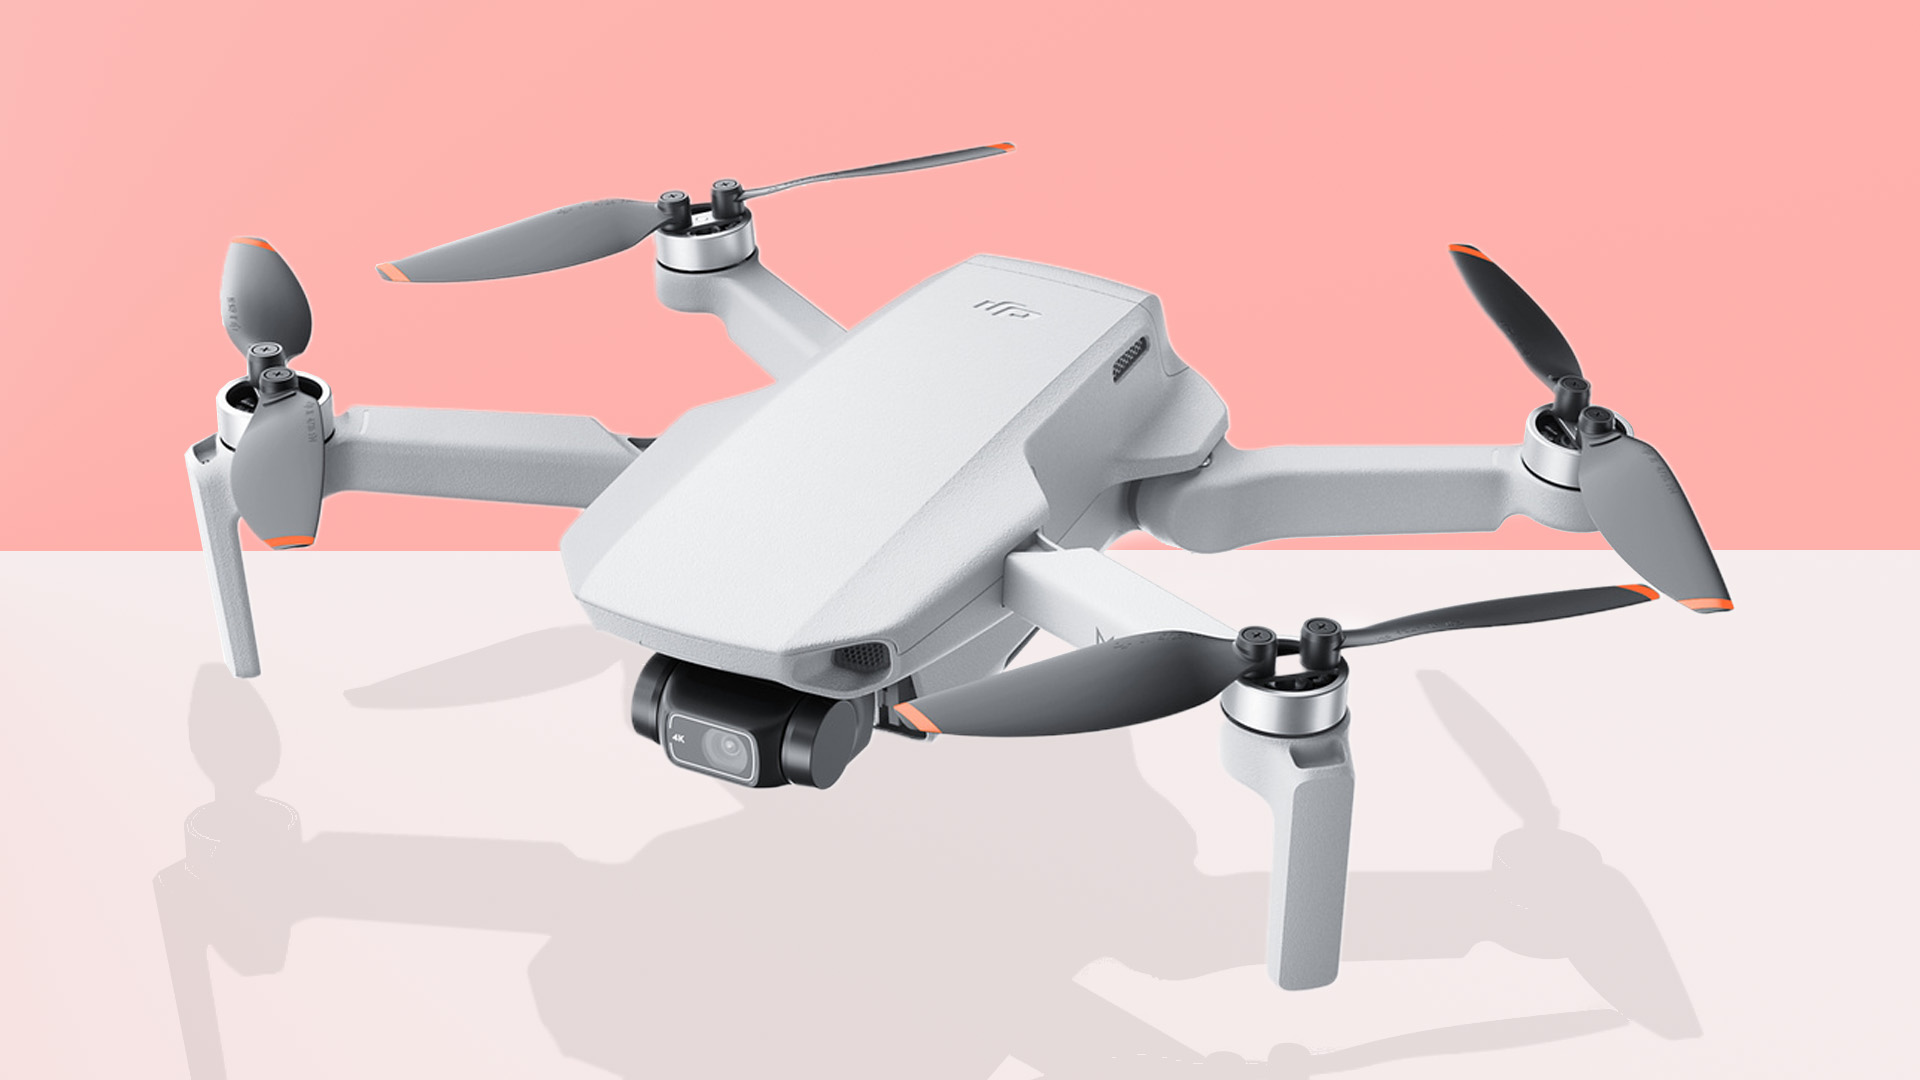 The DJI Mini 2 drone on a pink and grey background